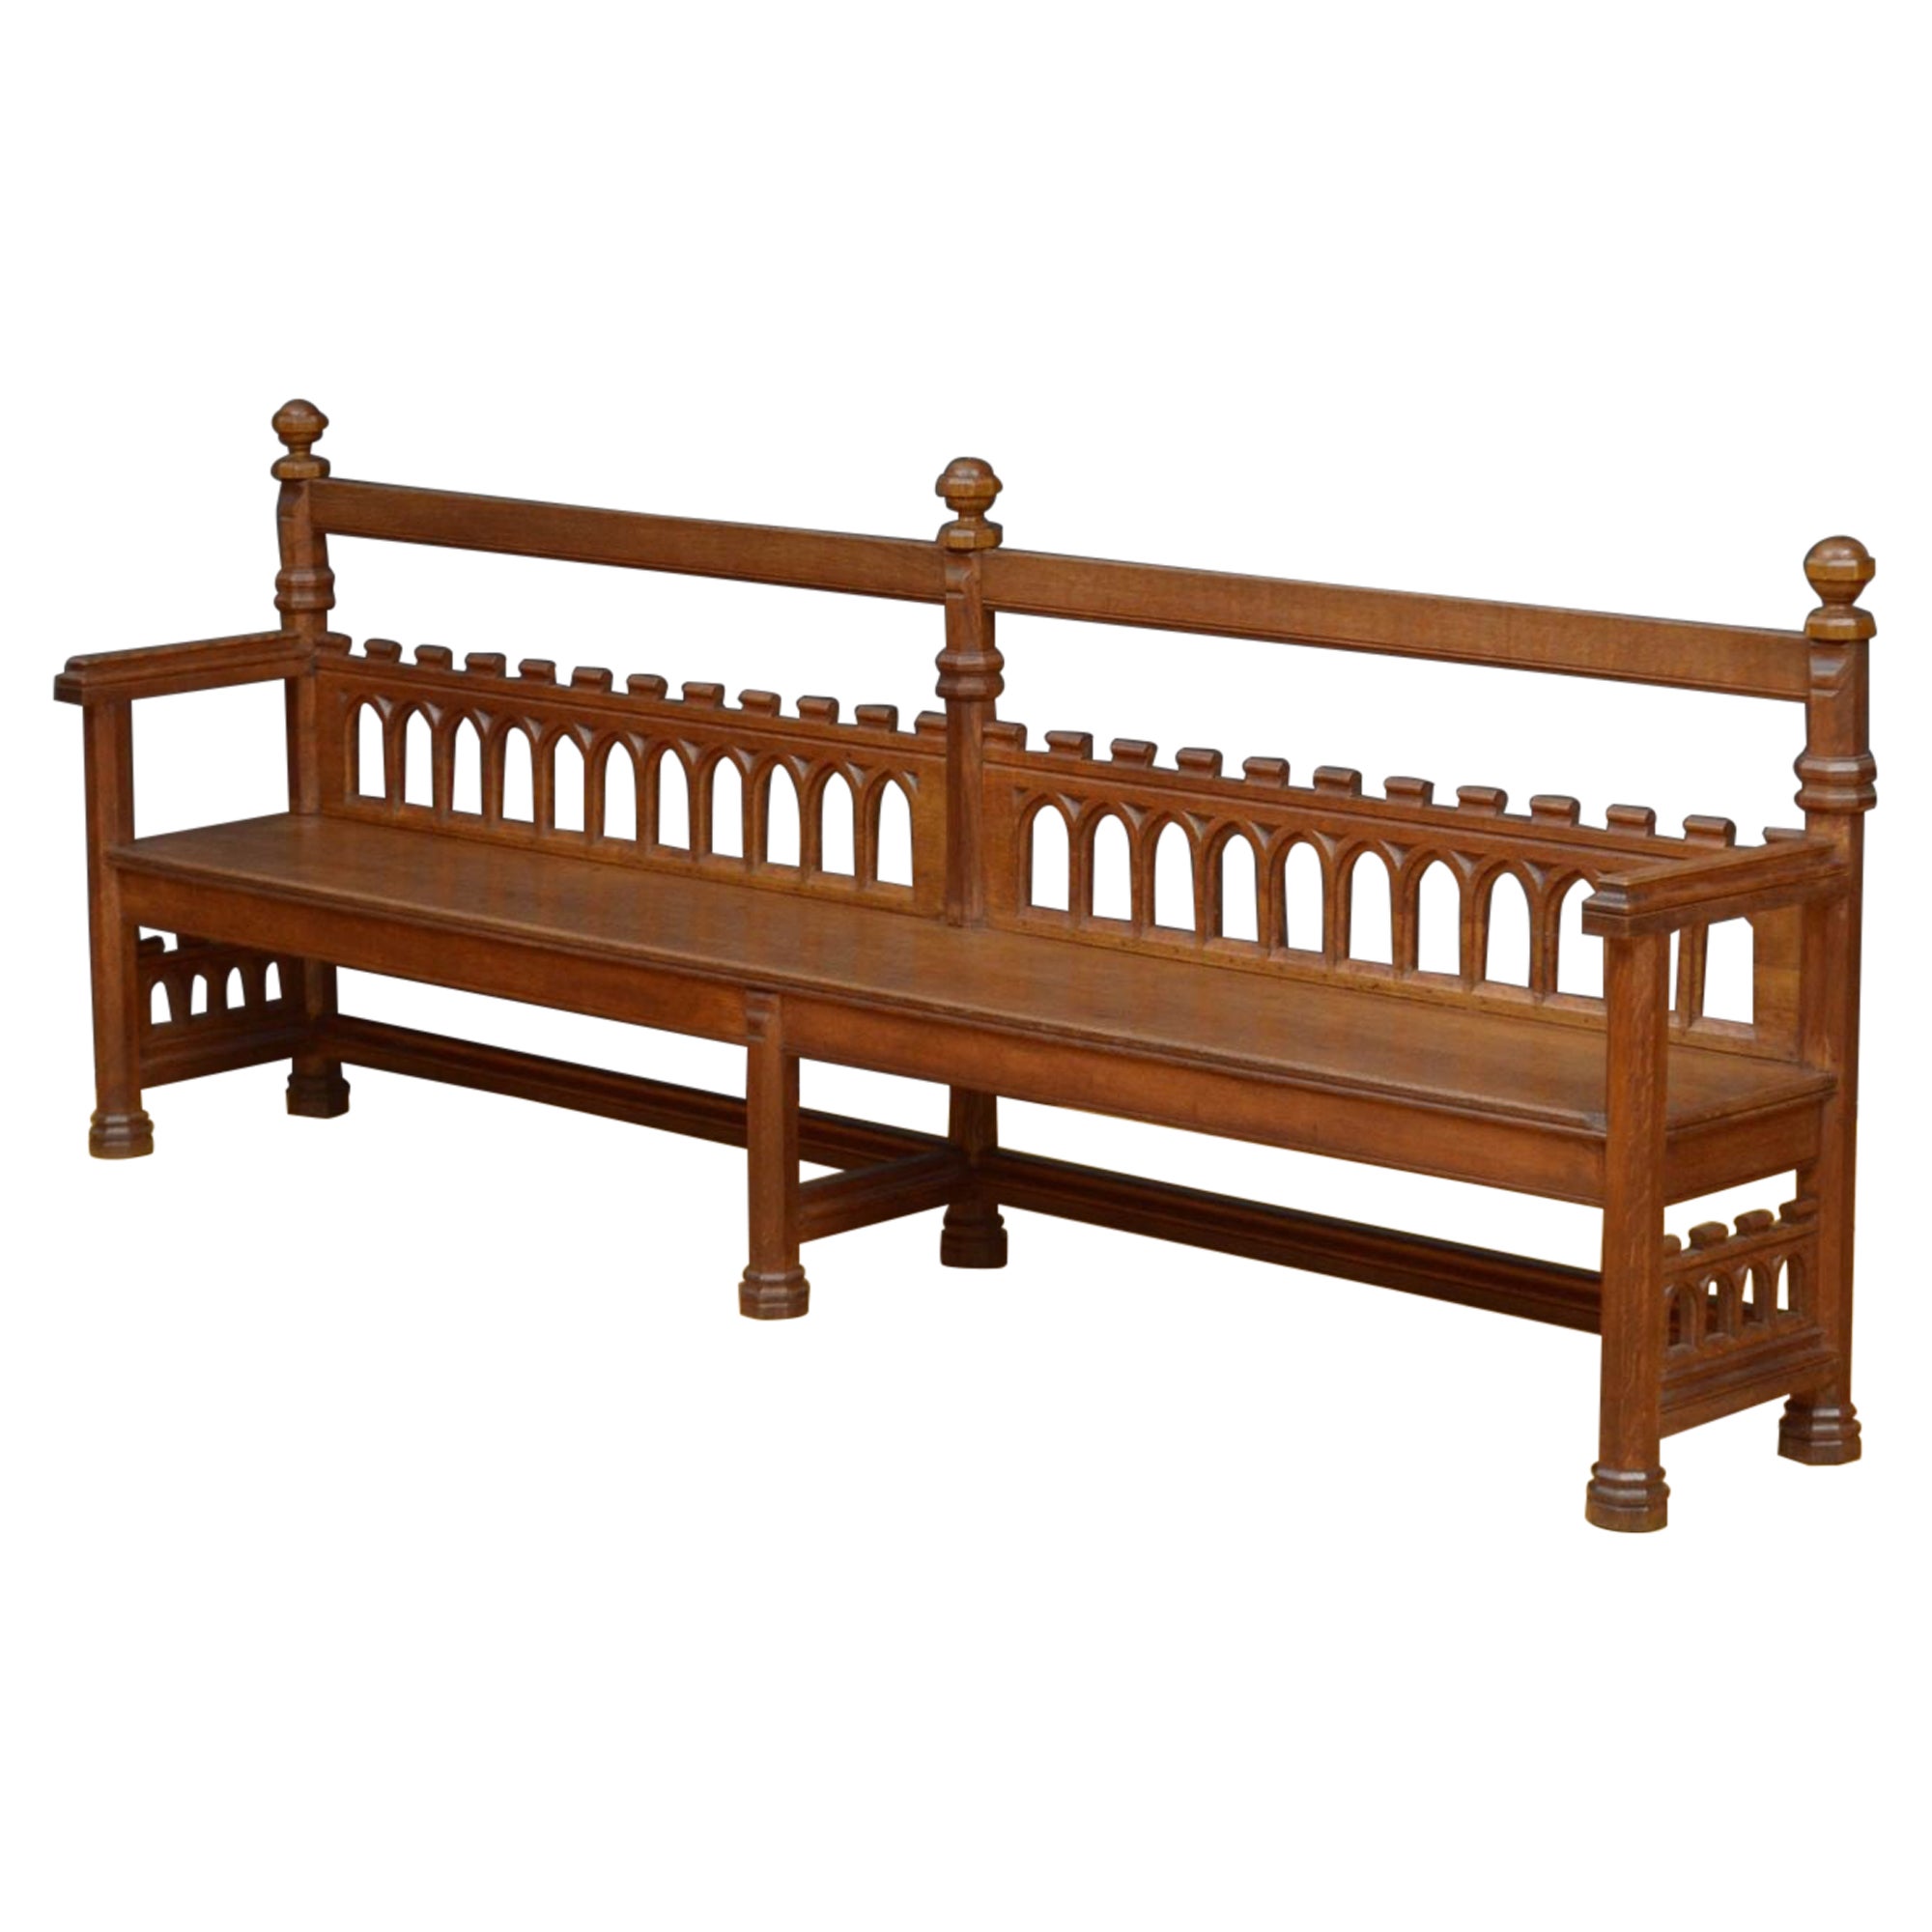 Long and Stylish Victorian Gothic Revival Hall Bench in Oak / Church Pew